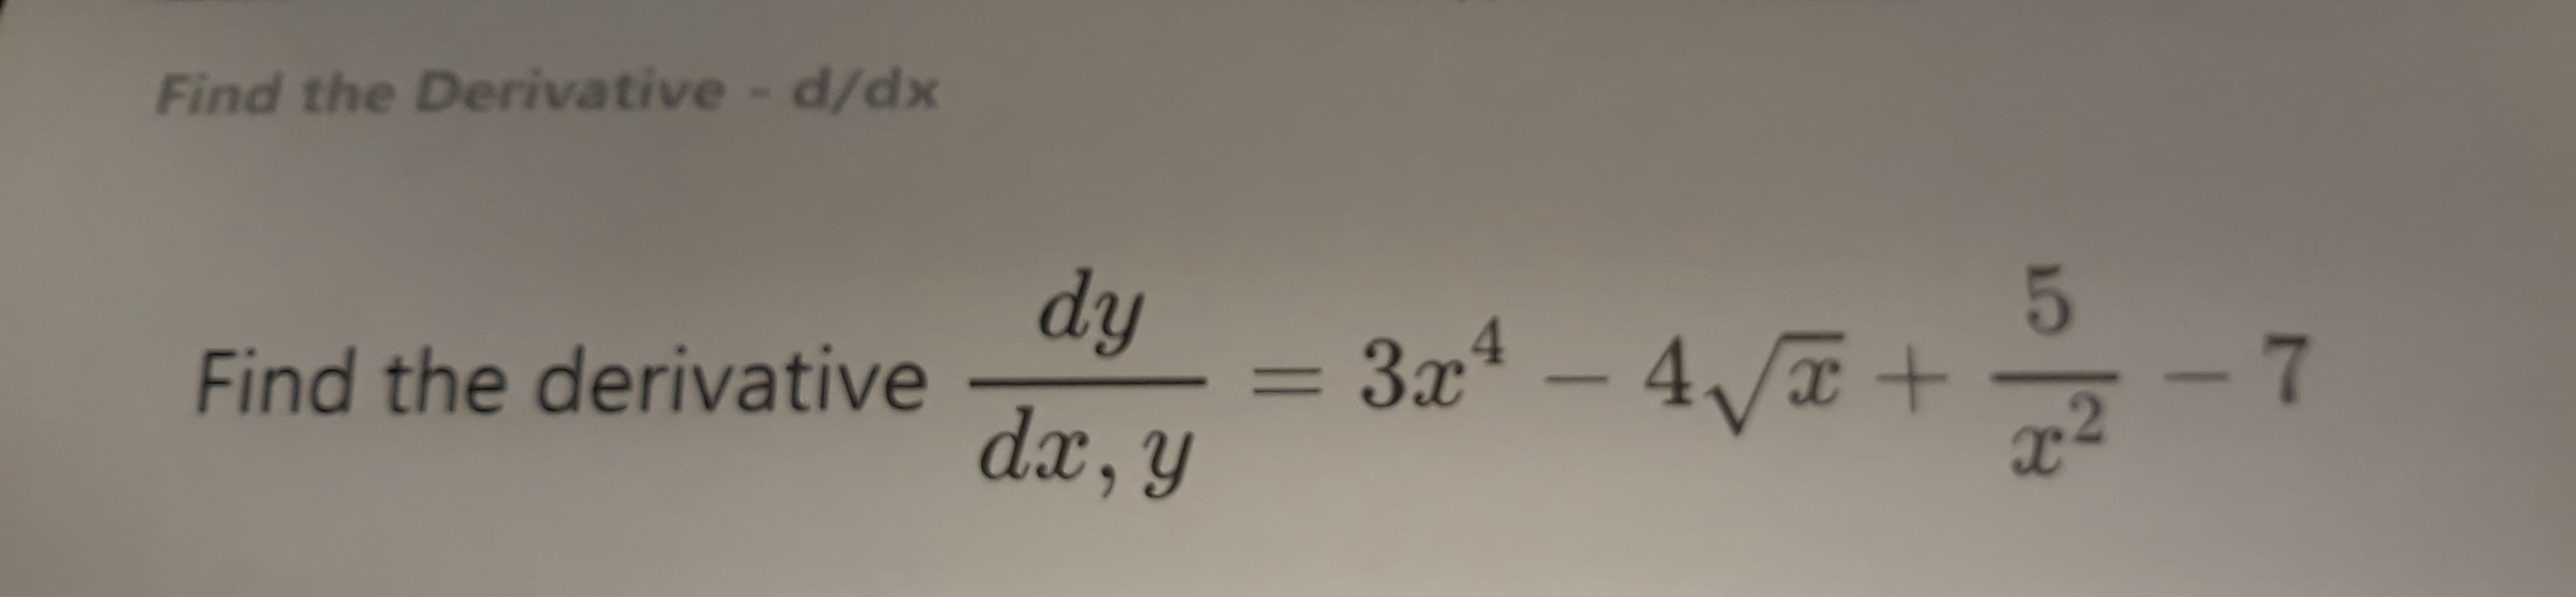 5
dy
3x4 – 4T +
x2
Find the derivative
dx, y
